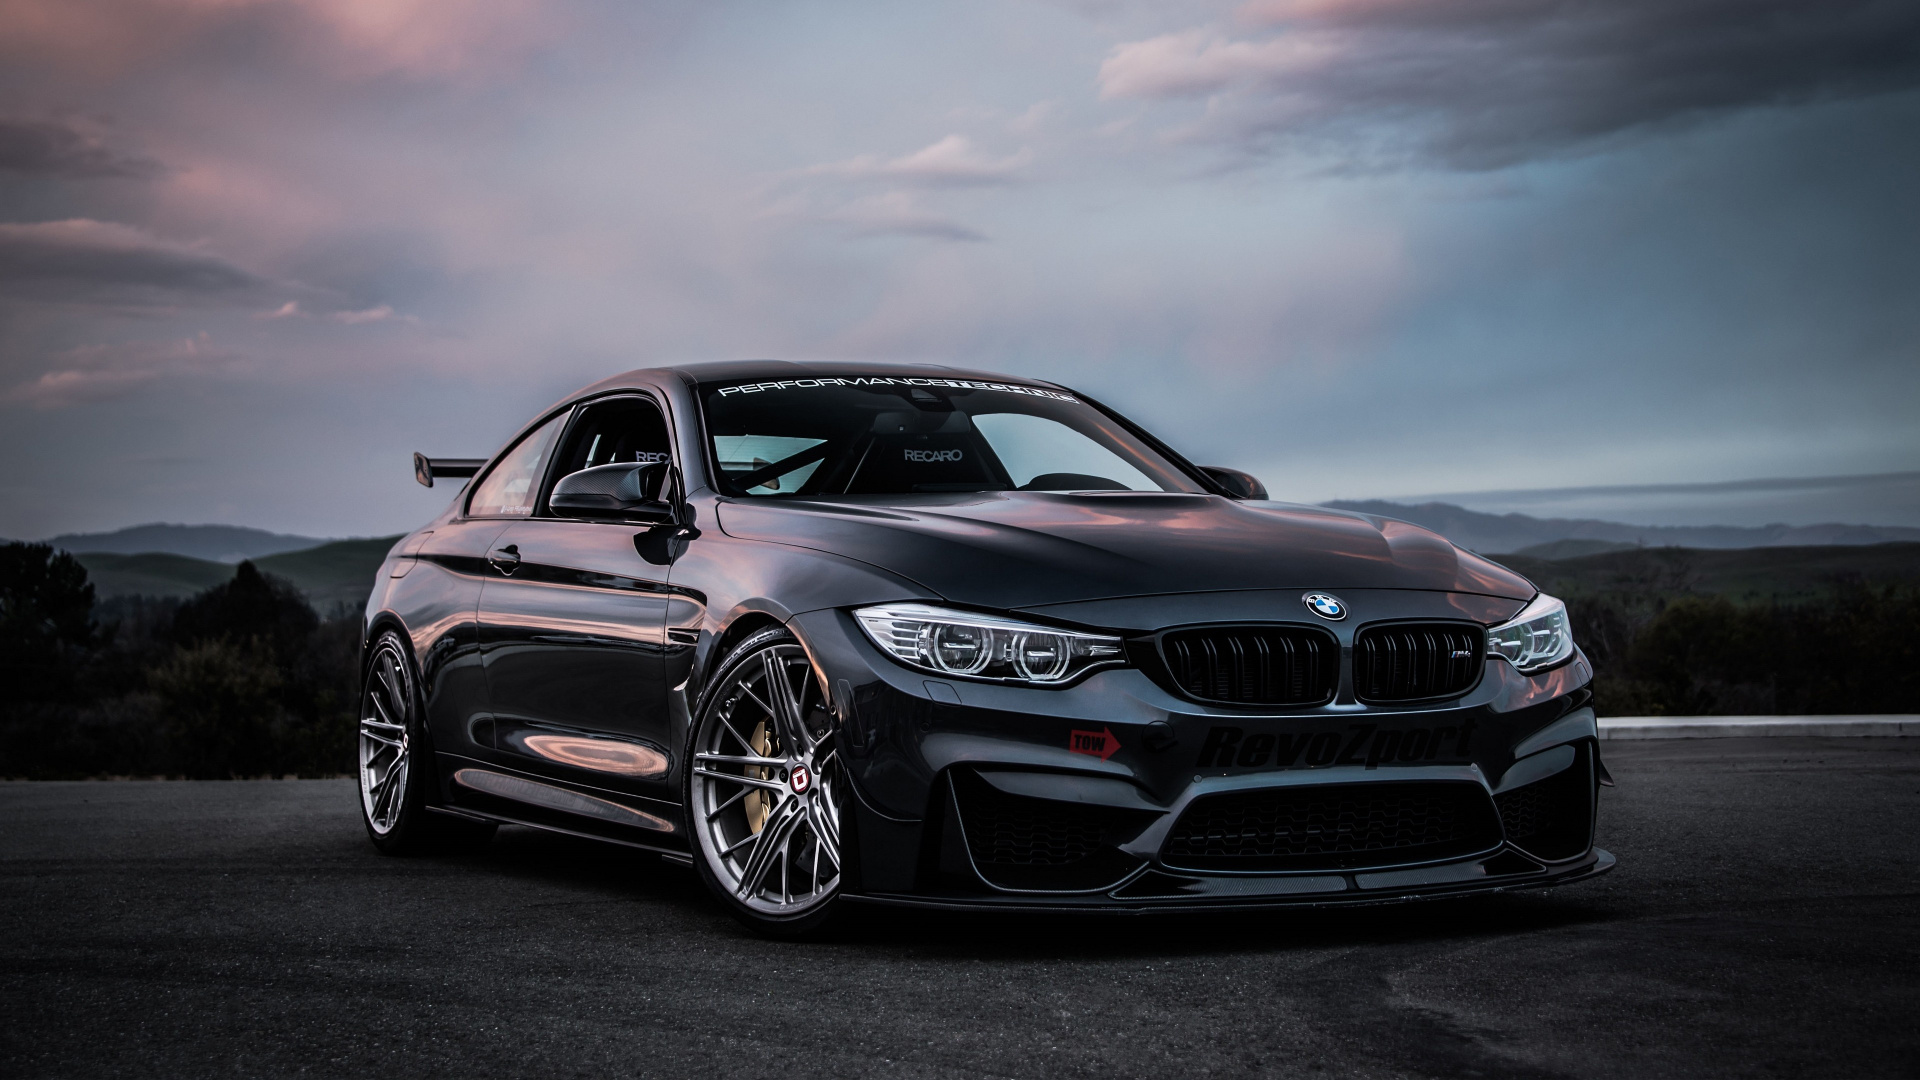 Negro Bmw m 3 Coupe. Wallpaper in 1920x1080 Resolution